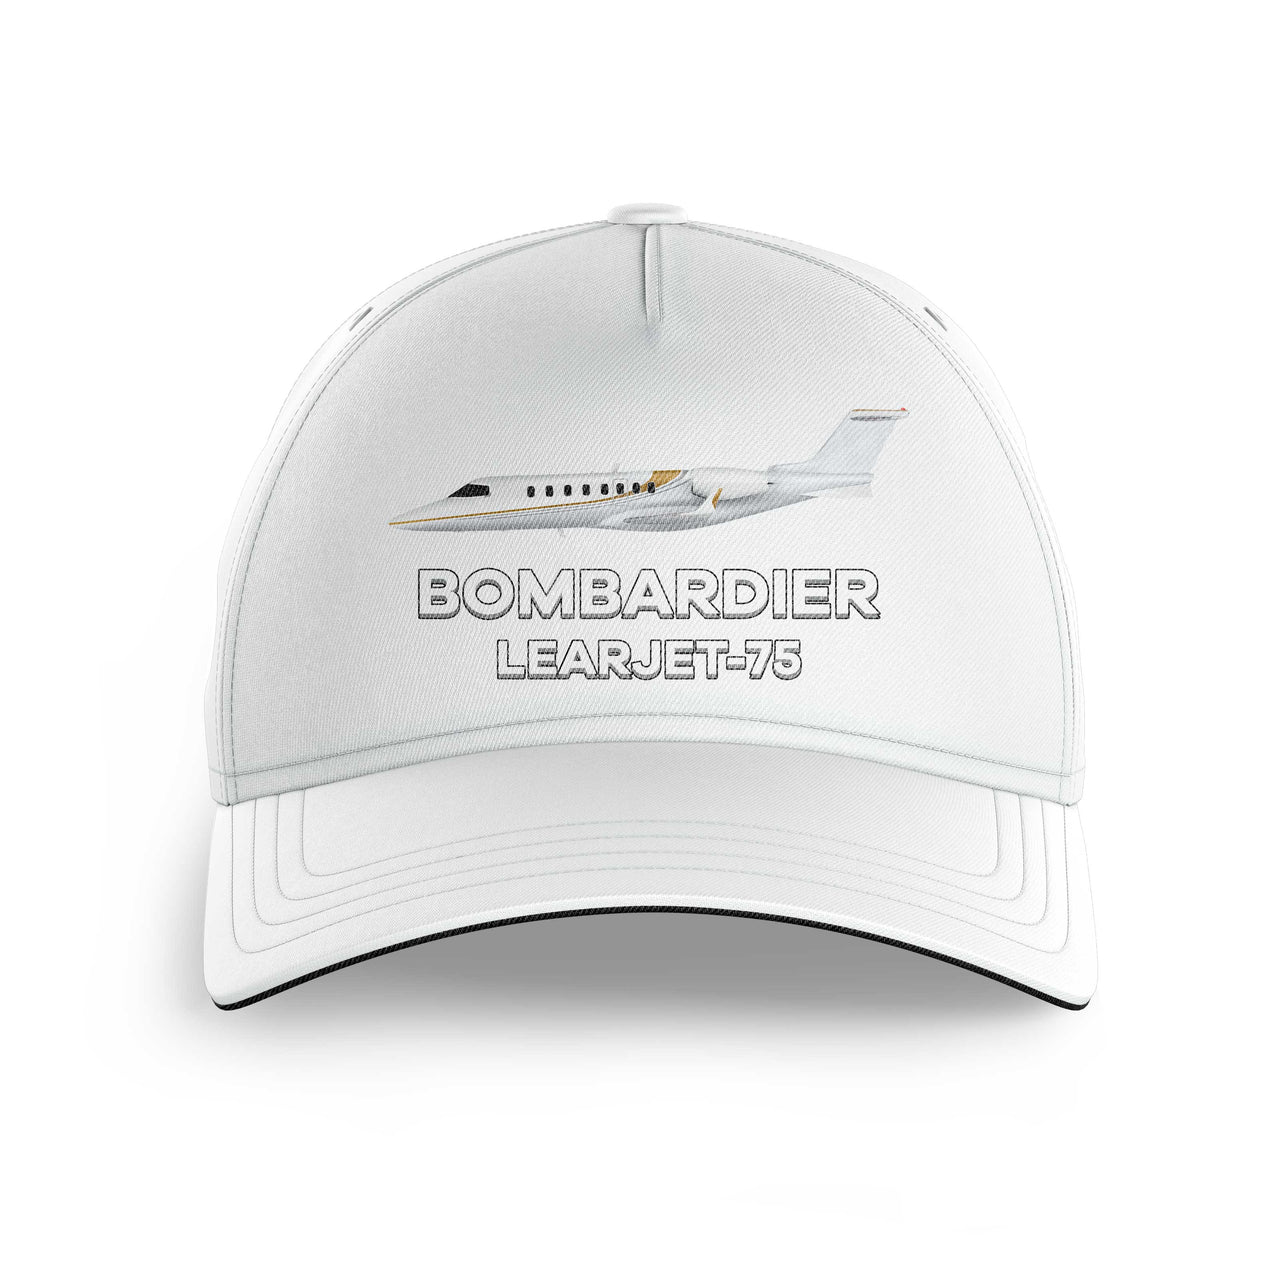 The Bombardier Learjet 75 Printed Hats